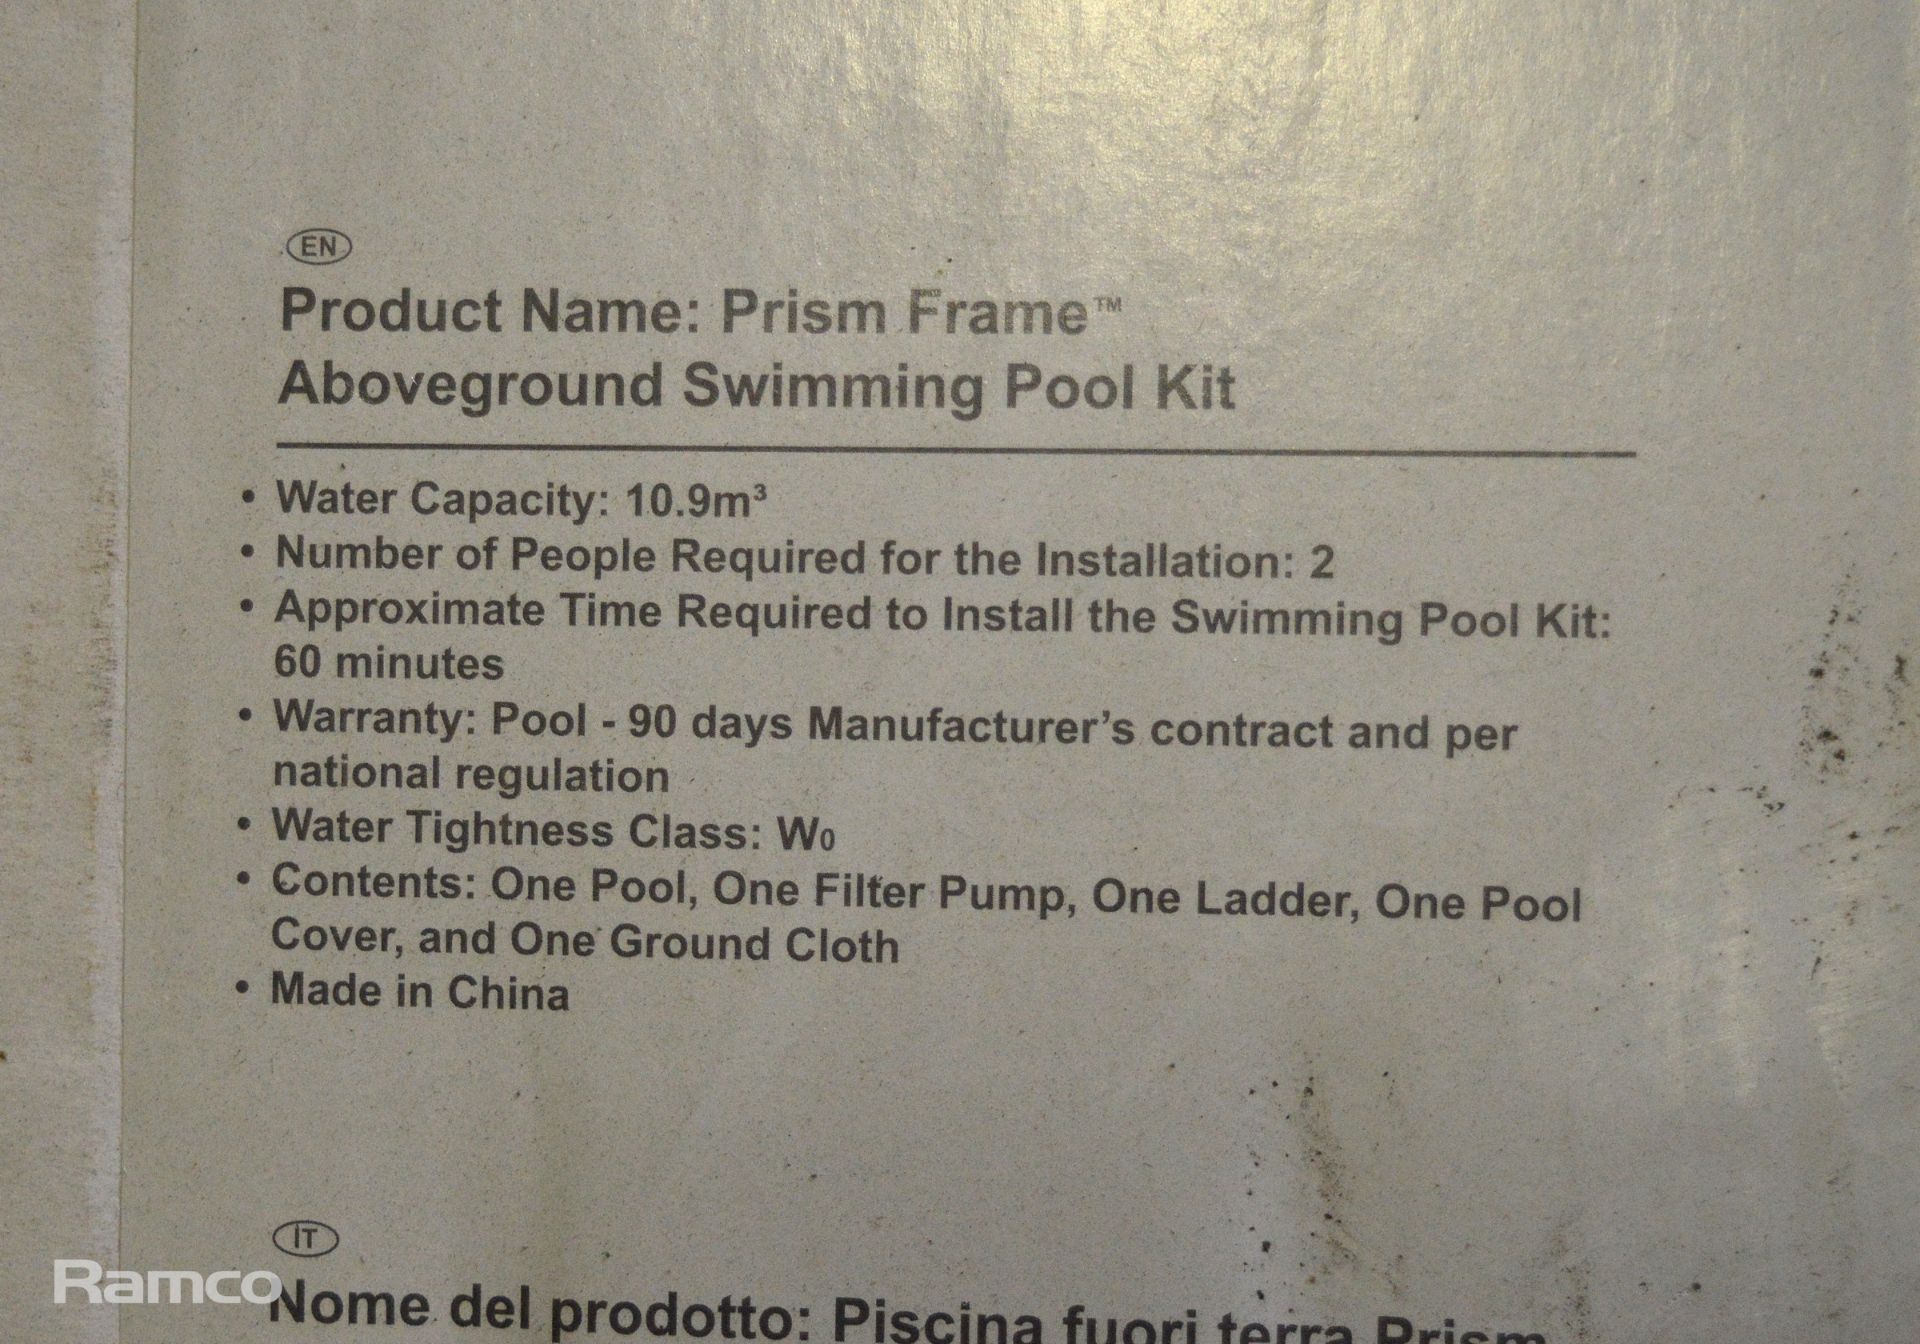 Intex Prism Frame Swimming Pool L 4860mm x W 2430mm x H 1070mm (when inflated) - Image 3 of 4